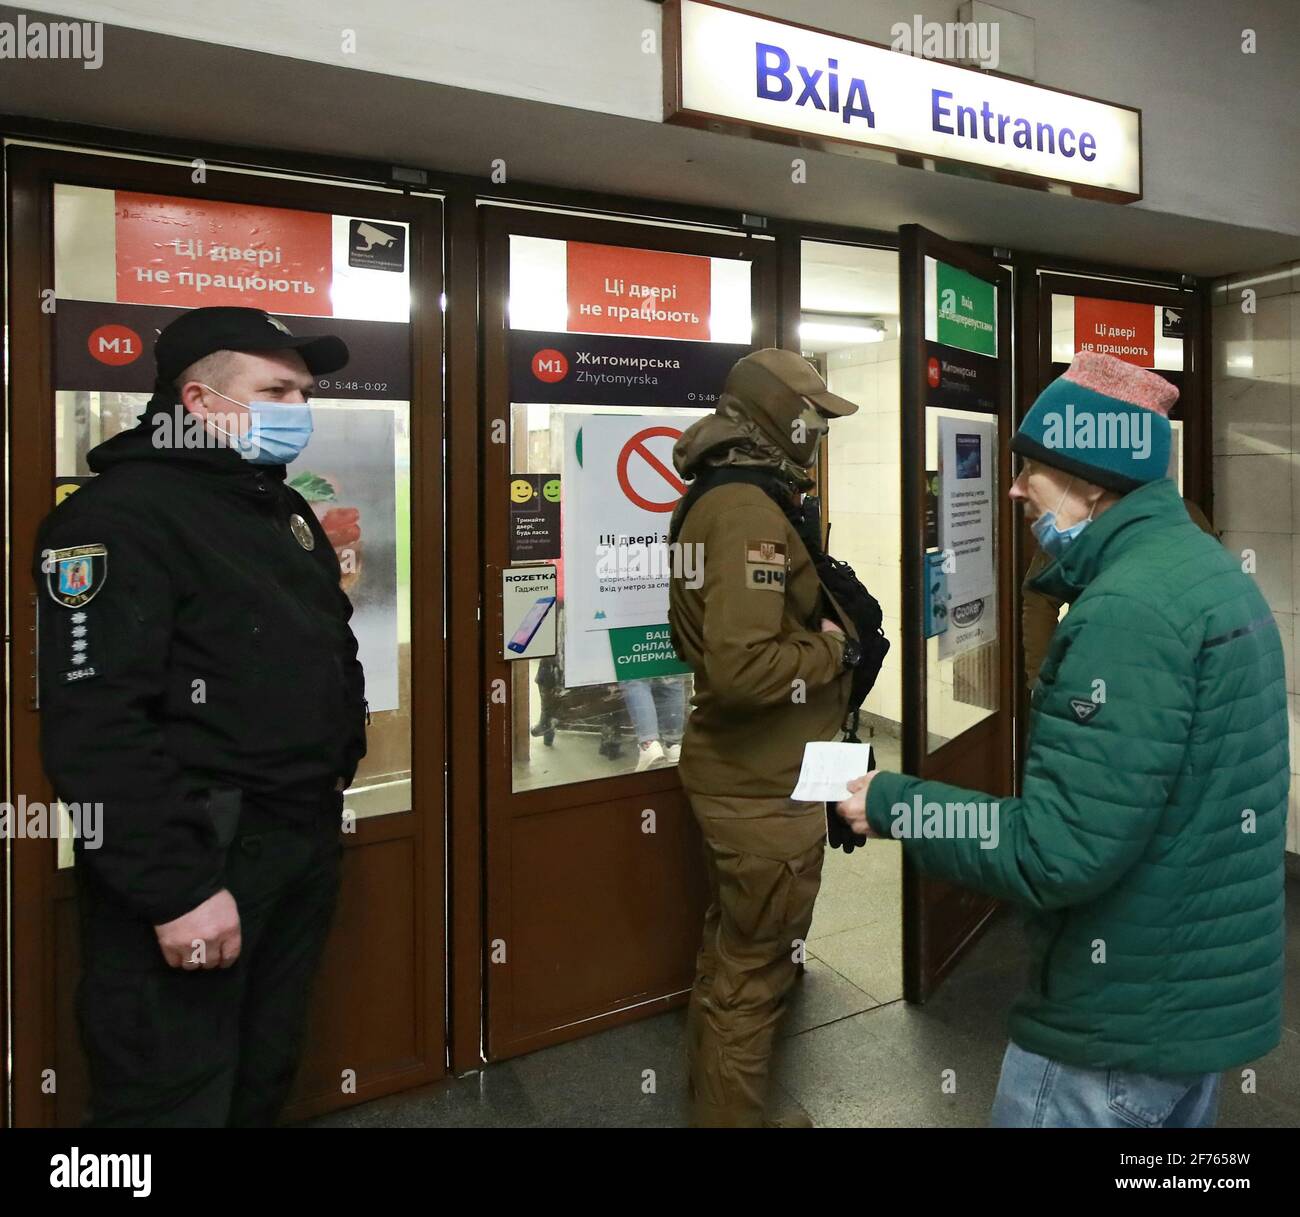 KYIV, UKRAINE - APRIL 05, 2021 - A man shows his documents to a police officer at the entrance to the Zhytomyrska metro station, Kyiv, capital of Ukraine Credit: Ukrinform/Alamy Live News Stock Photo